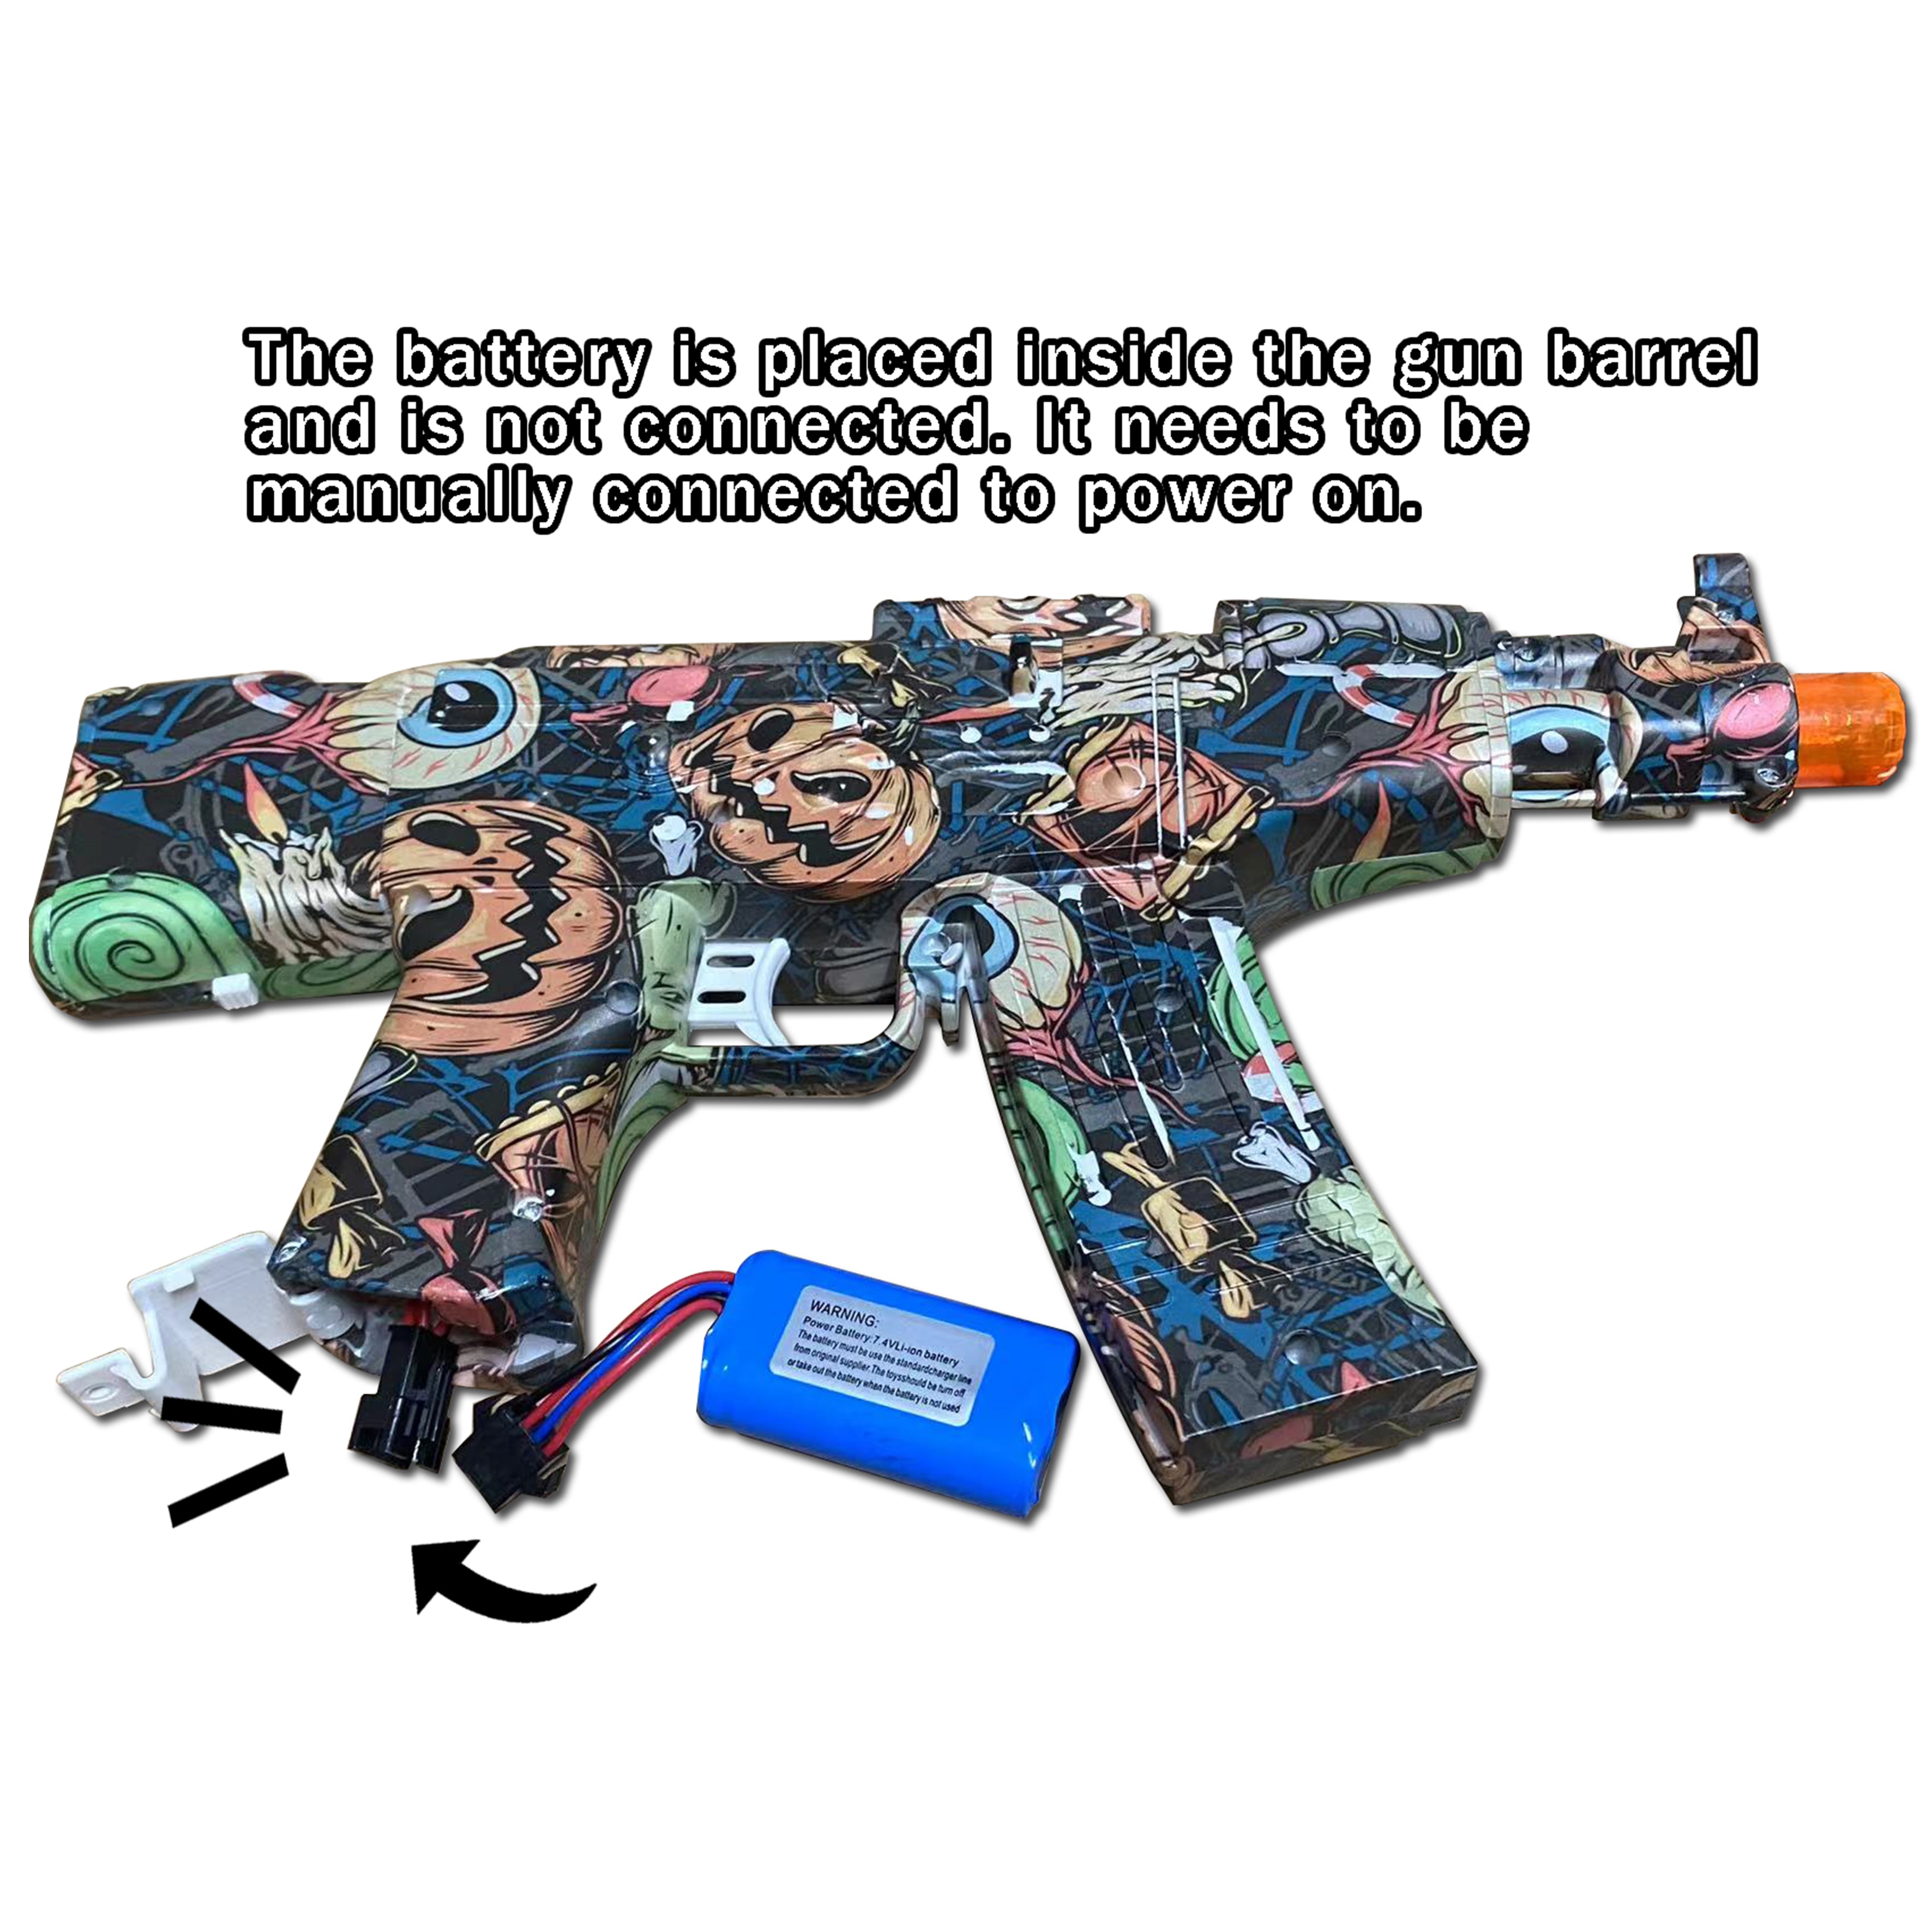 Ak47 Gel Blaster | Electric Splatter Ball Blaster AEG AKM-47,Outdoor Activities,With 20k+ Gel Bullet And Goggles,Toy Guns For Kids Ages 12+